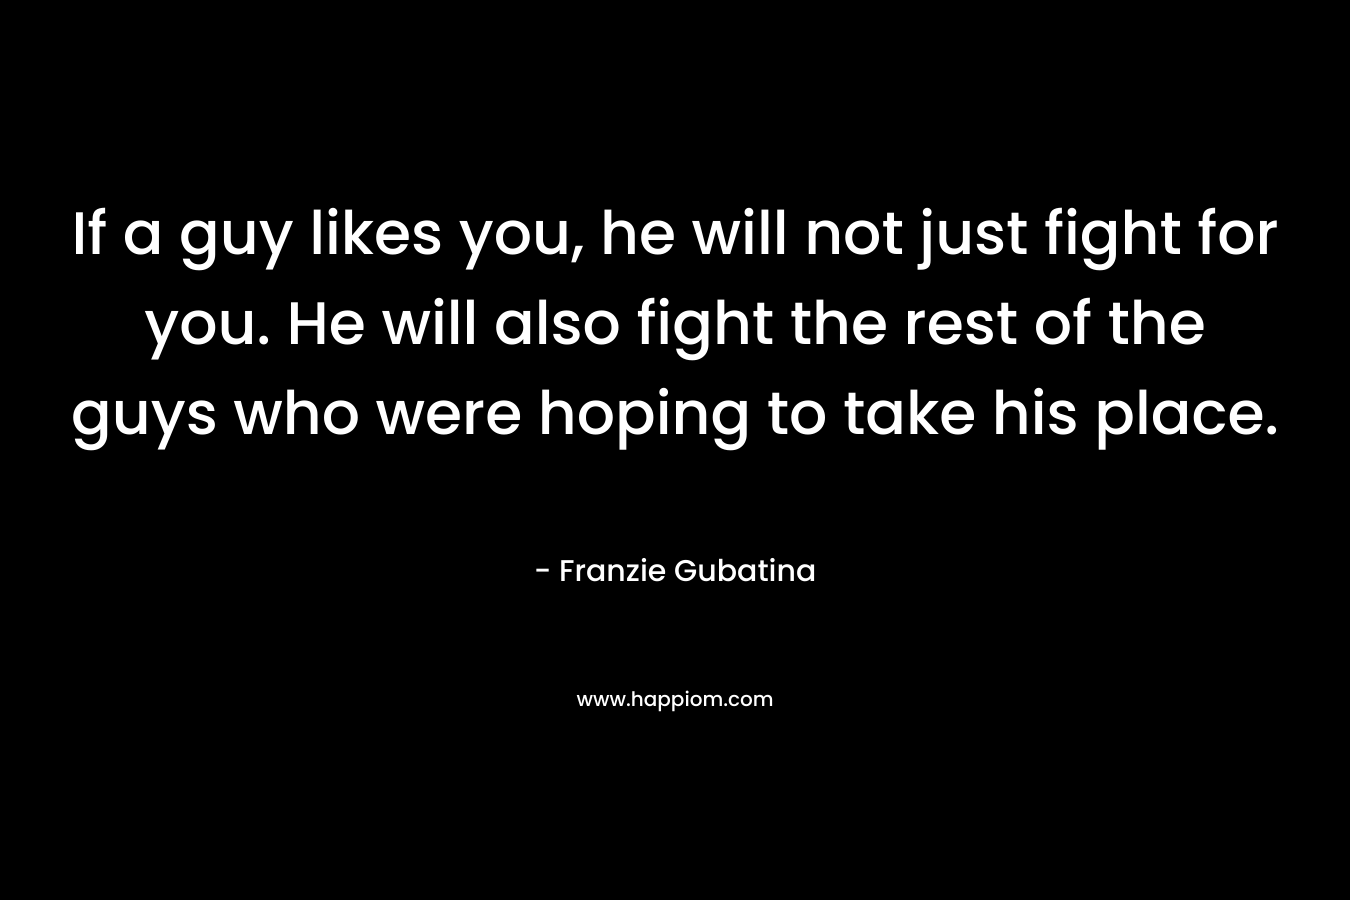 If a guy likes you, he will not just fight for you. He will also fight the rest of the guys who were hoping to take his place. – Franzie Gubatina